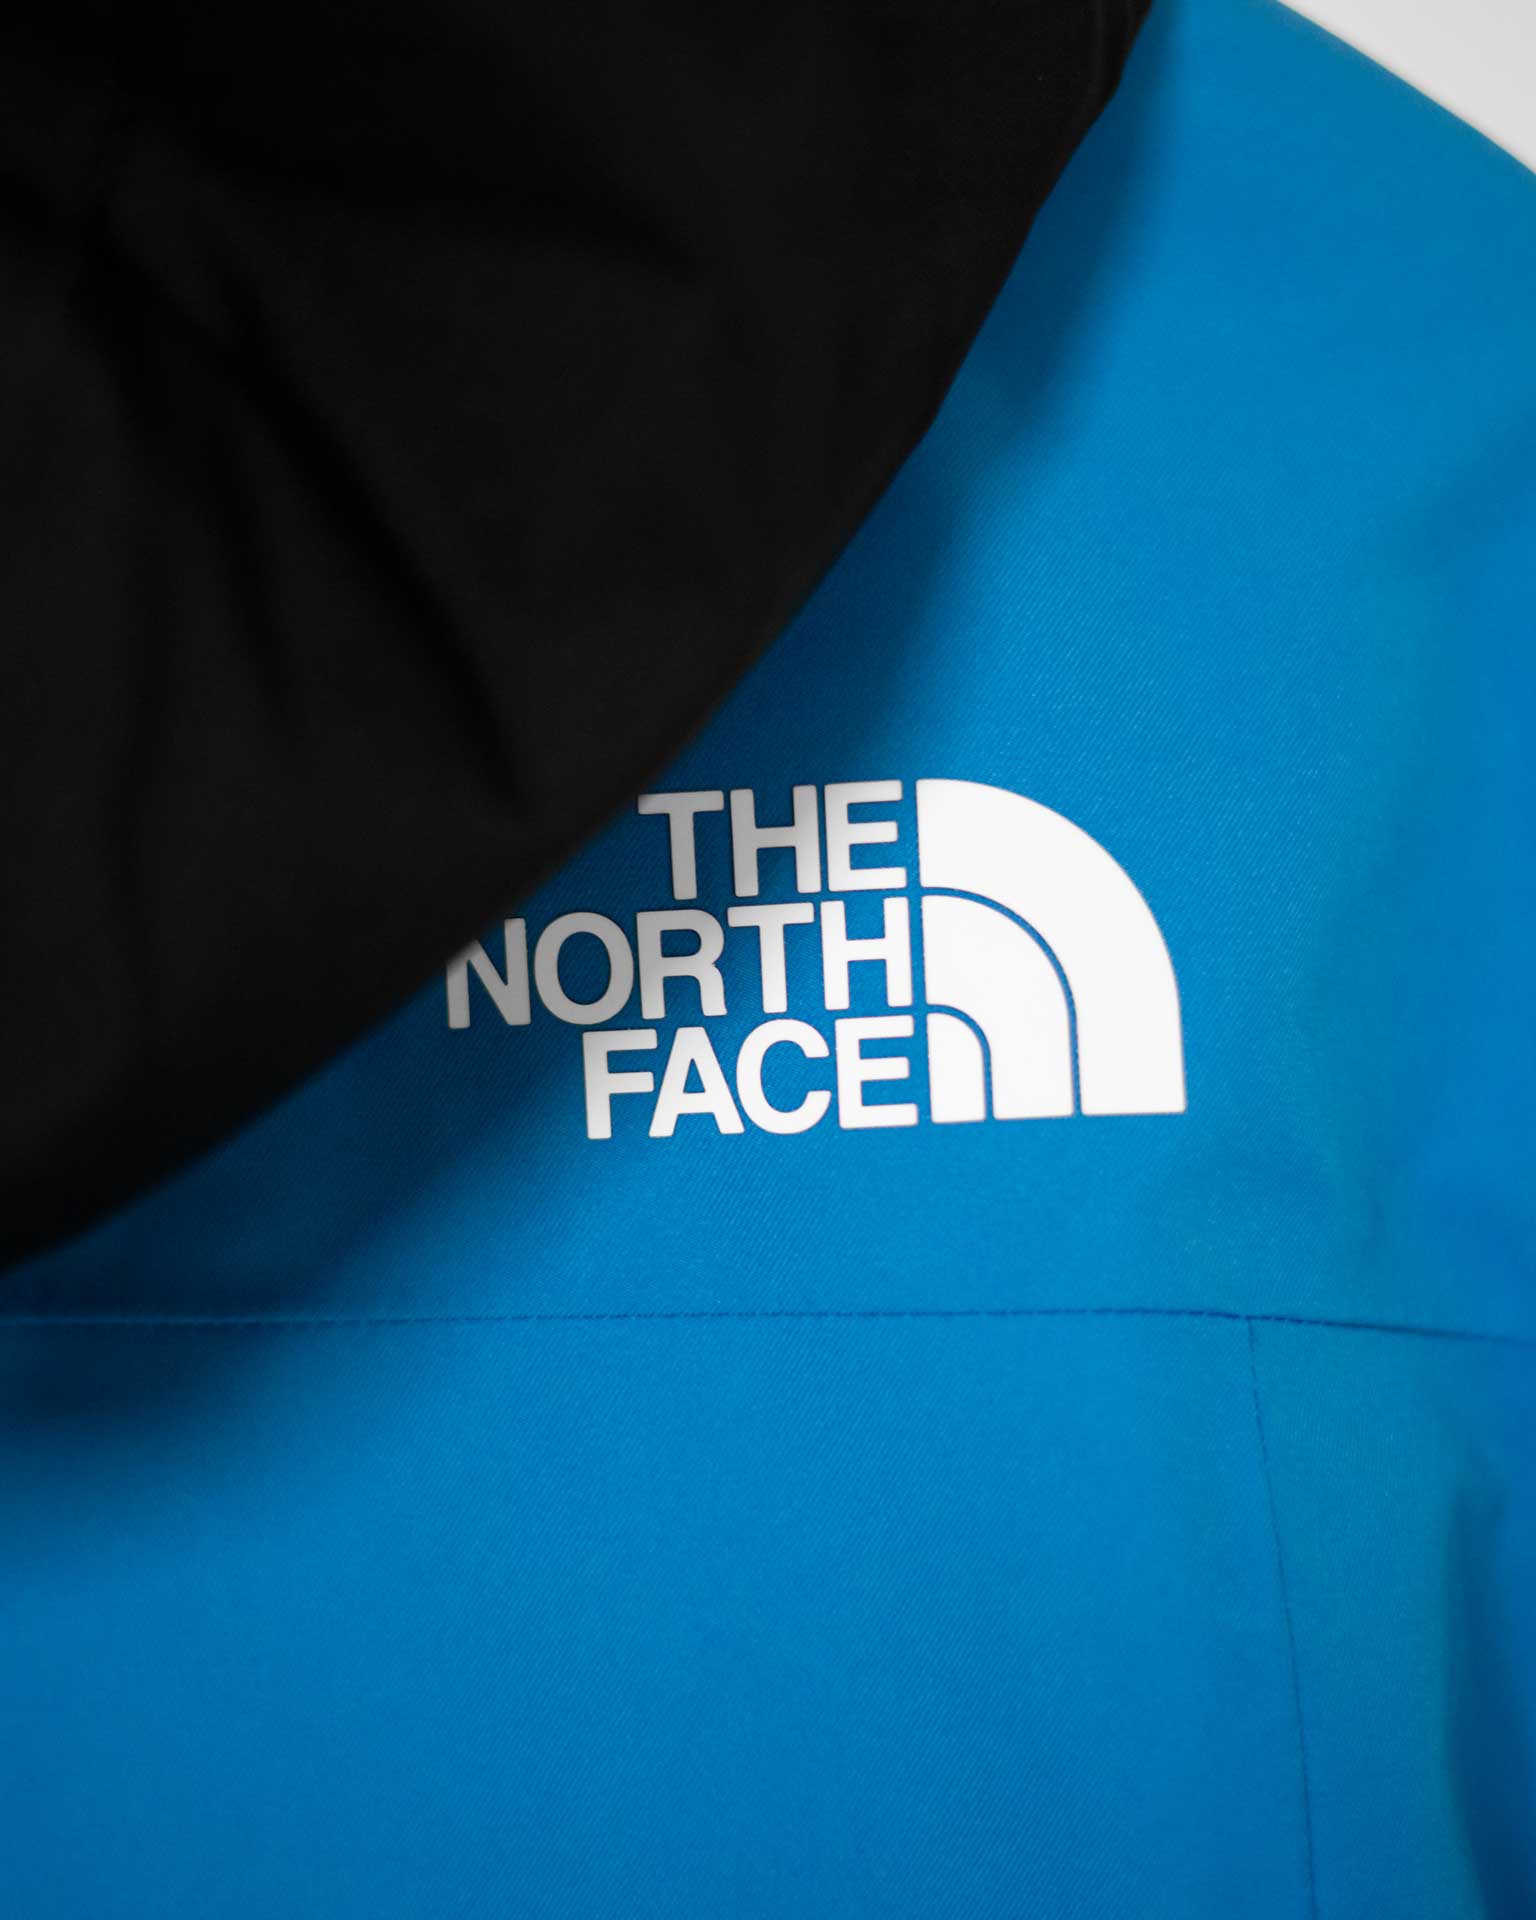 The Nort Face Blue and Black Lightweight Jacket